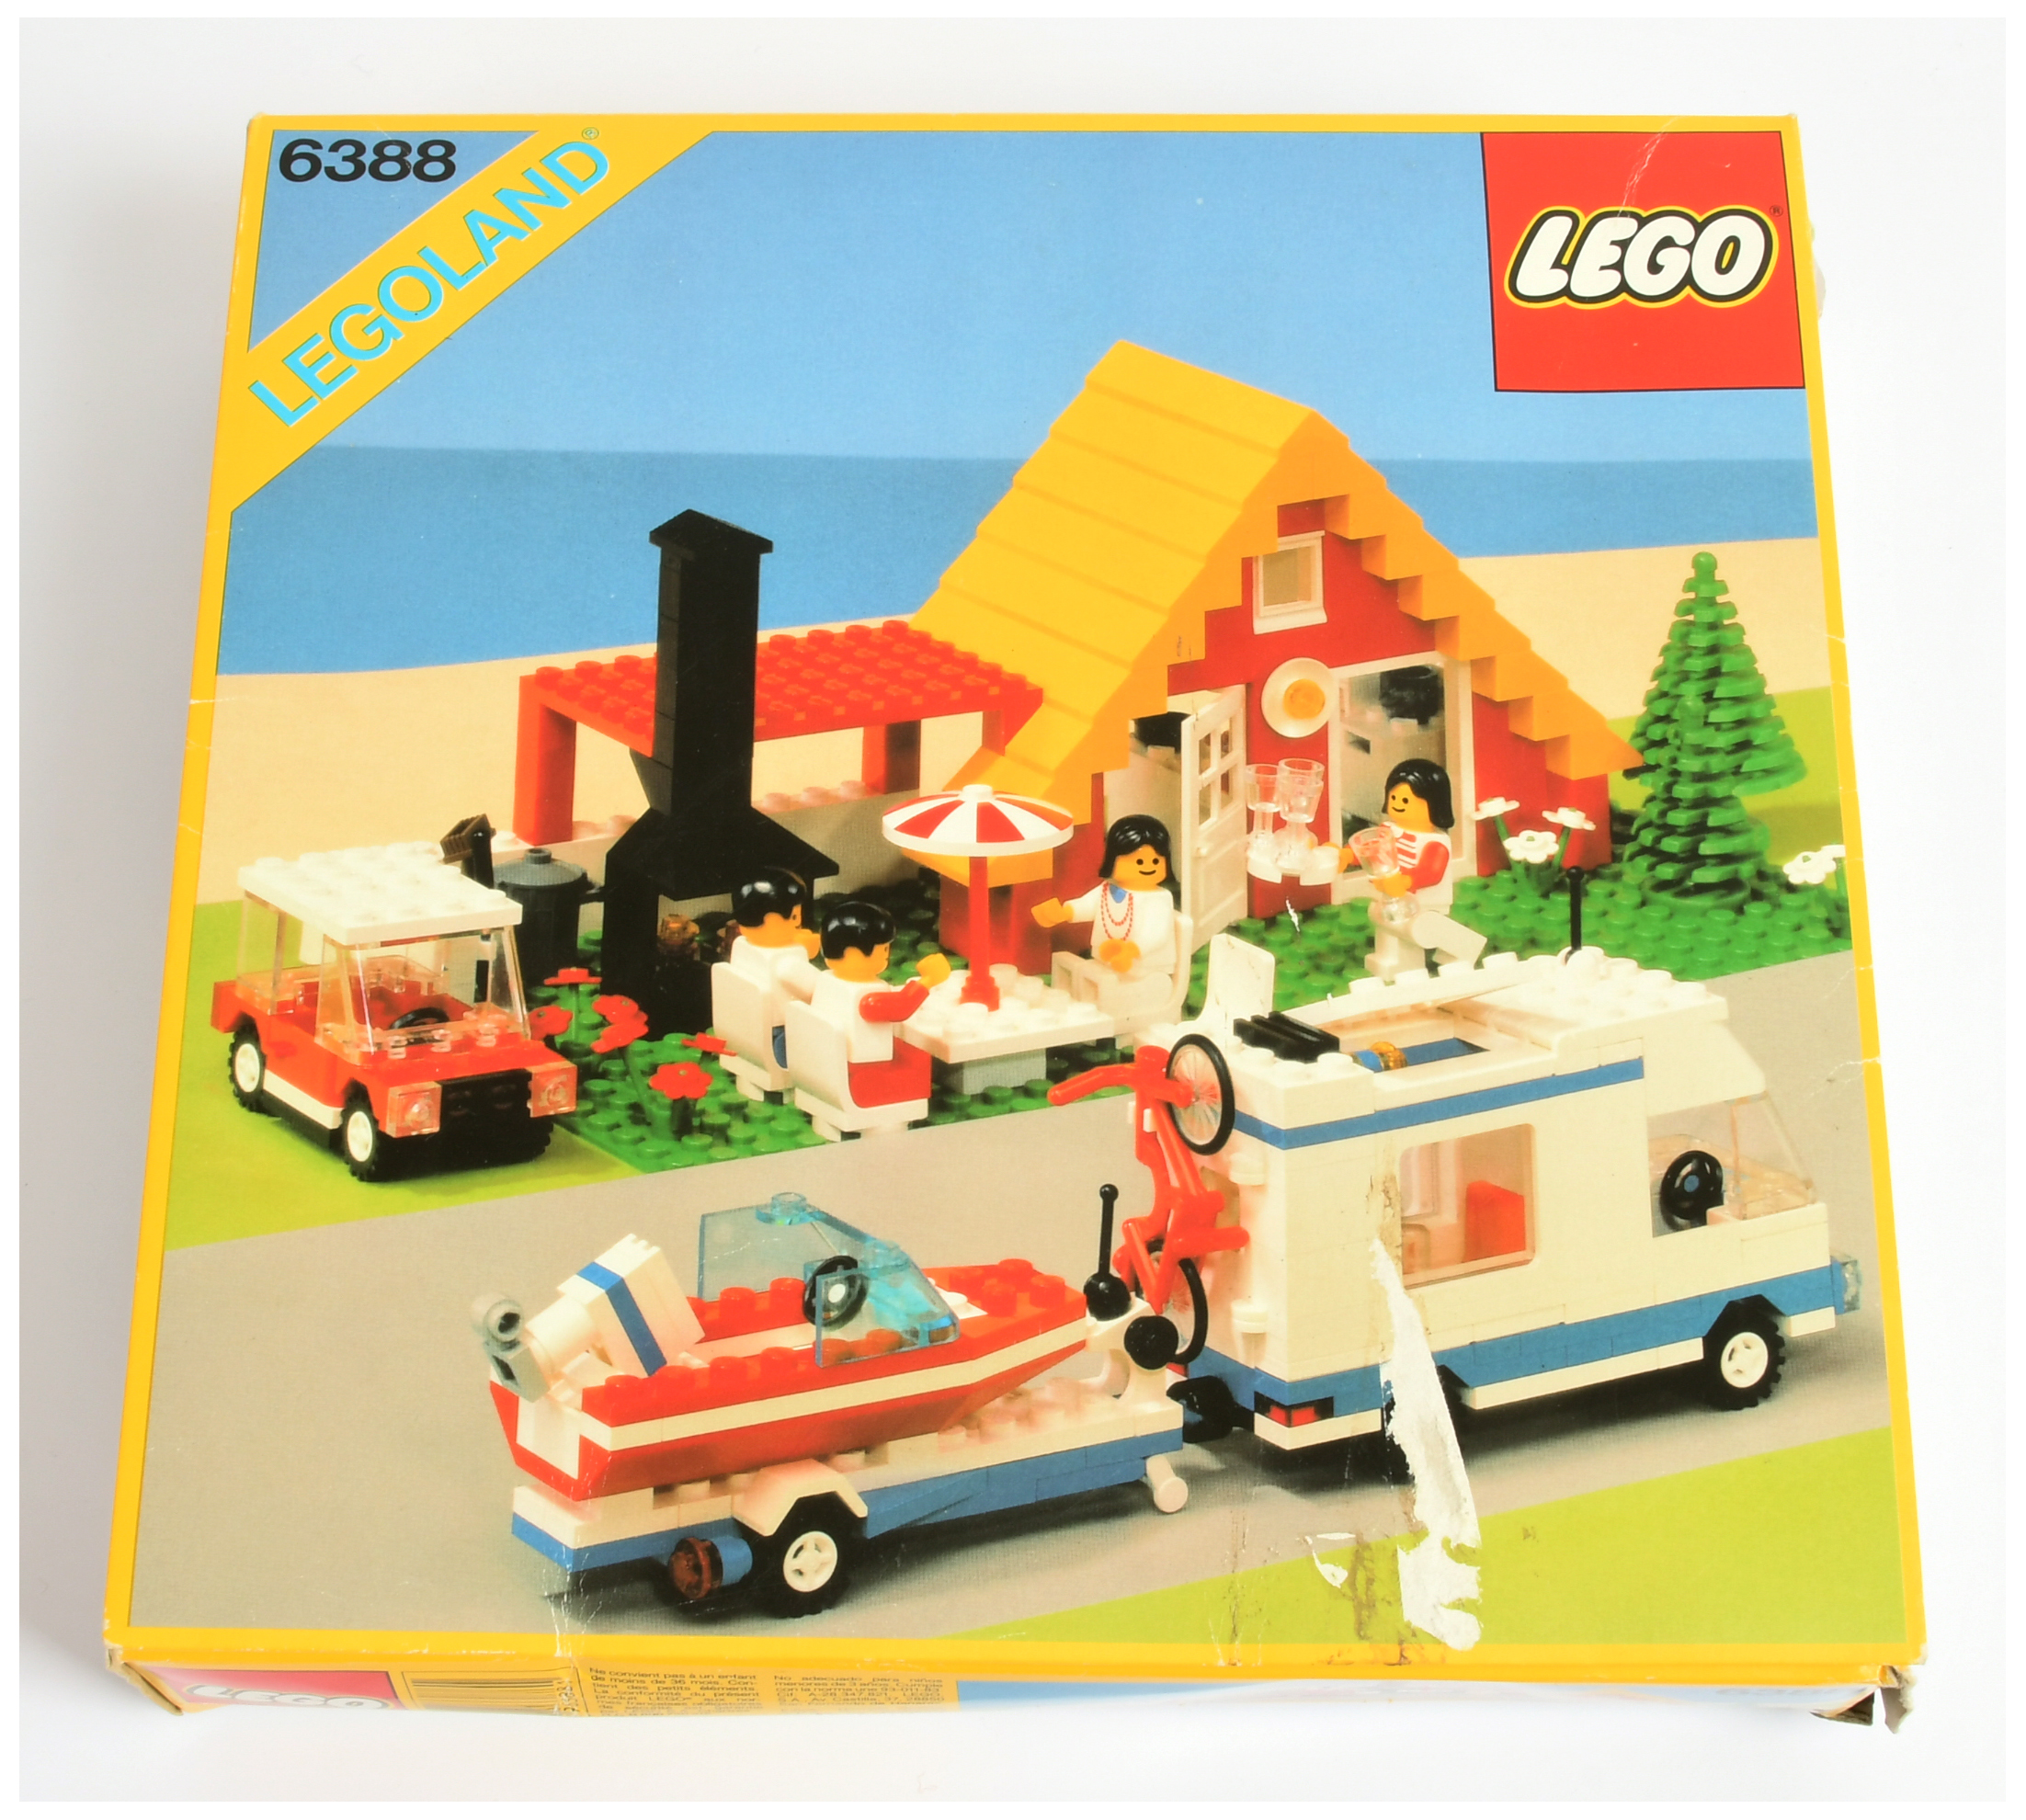 Lego 6388 Legoland Holiday Home With Caravan - Classic Town 1989, with original instructions, som...